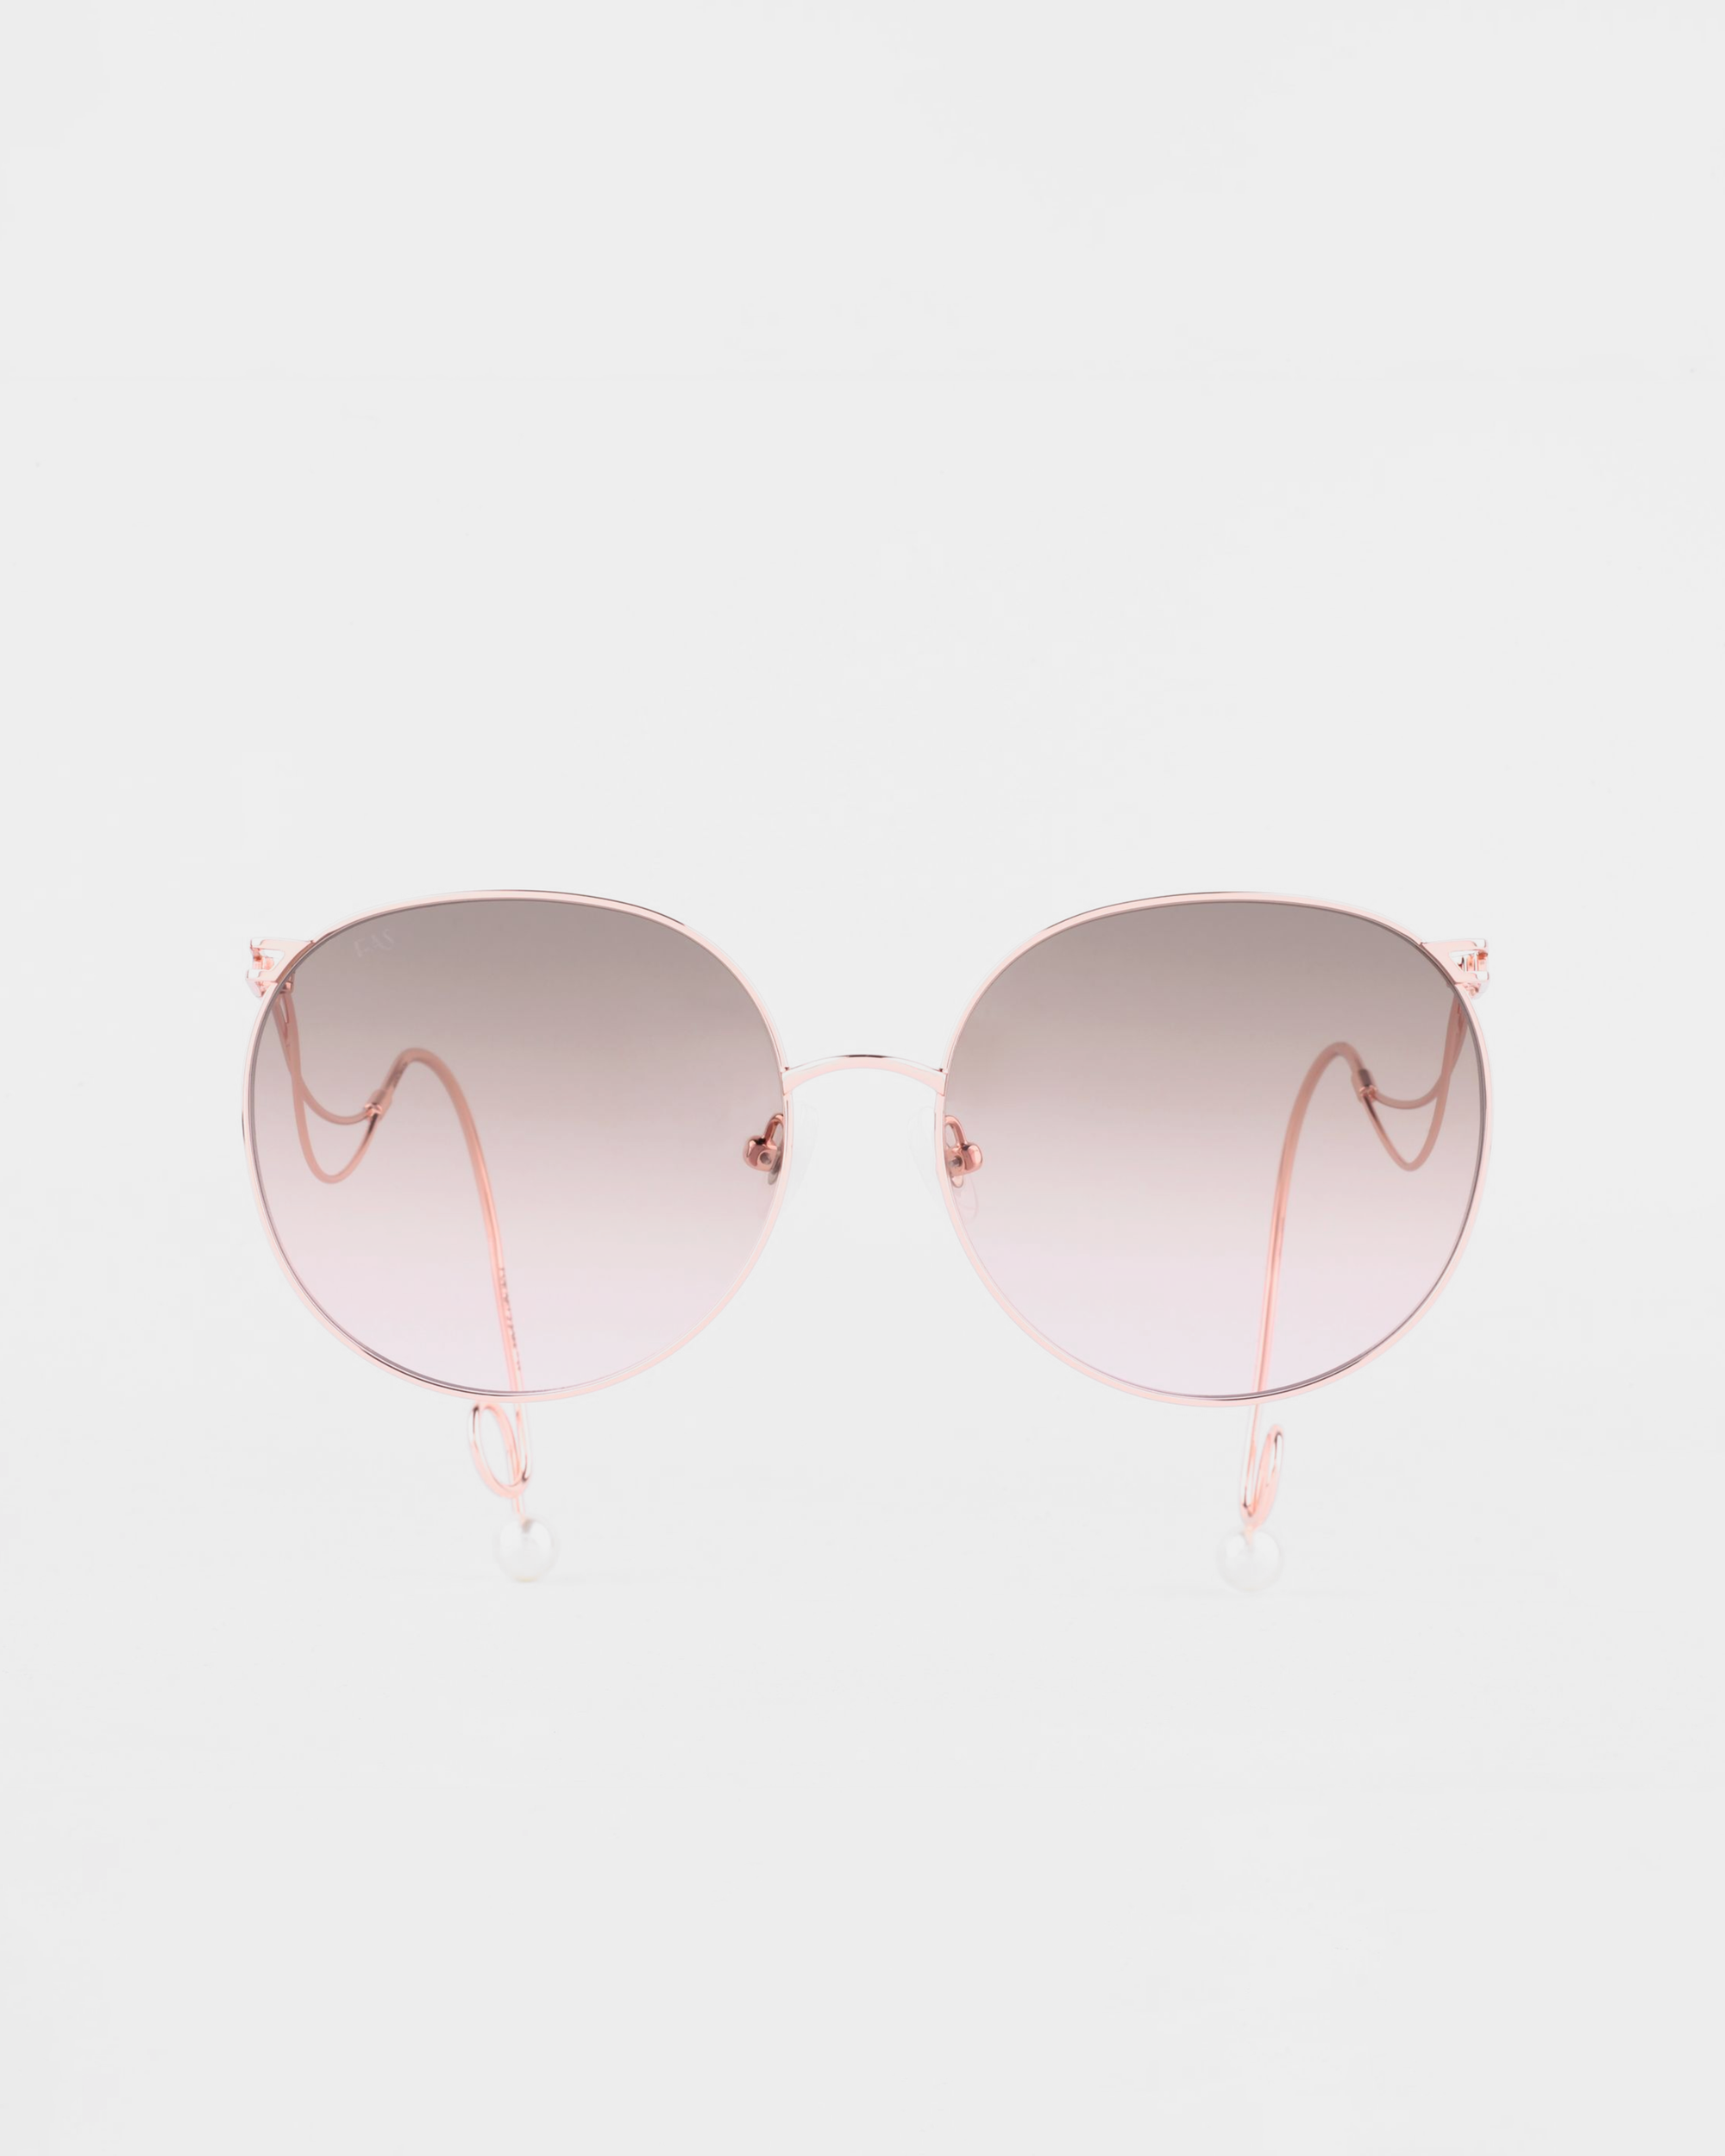 A pair of For Art&#39;s Sake® Birthday Cake sunglasses with handmade gold-plated, rose gold frames and gradient lenses that transition from light pink at the bottom to darker pink at the top. The UVA &amp; UVB-protected, shatter-resistant lenses offer clear sight while delicate, curved arms and clear nose pads add elegance. The background is plain white.